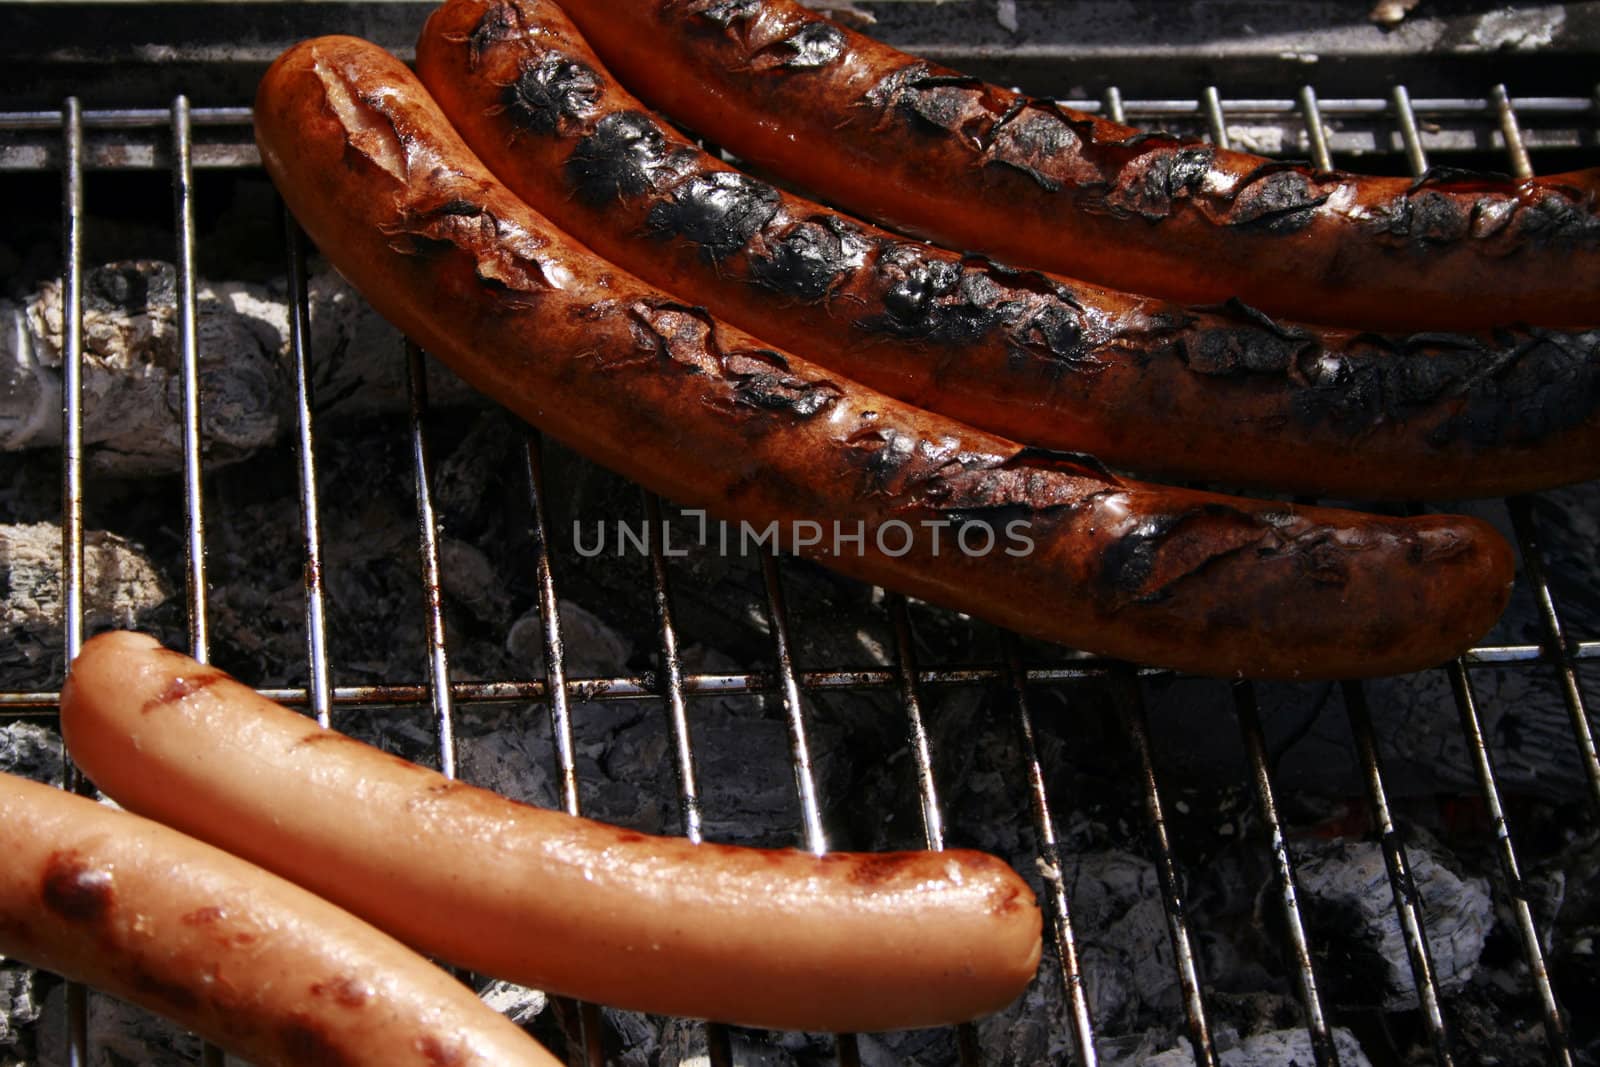 hot dogs barbecueing in the summer. three burned chilly dogs and a couple of plain hot dogs.